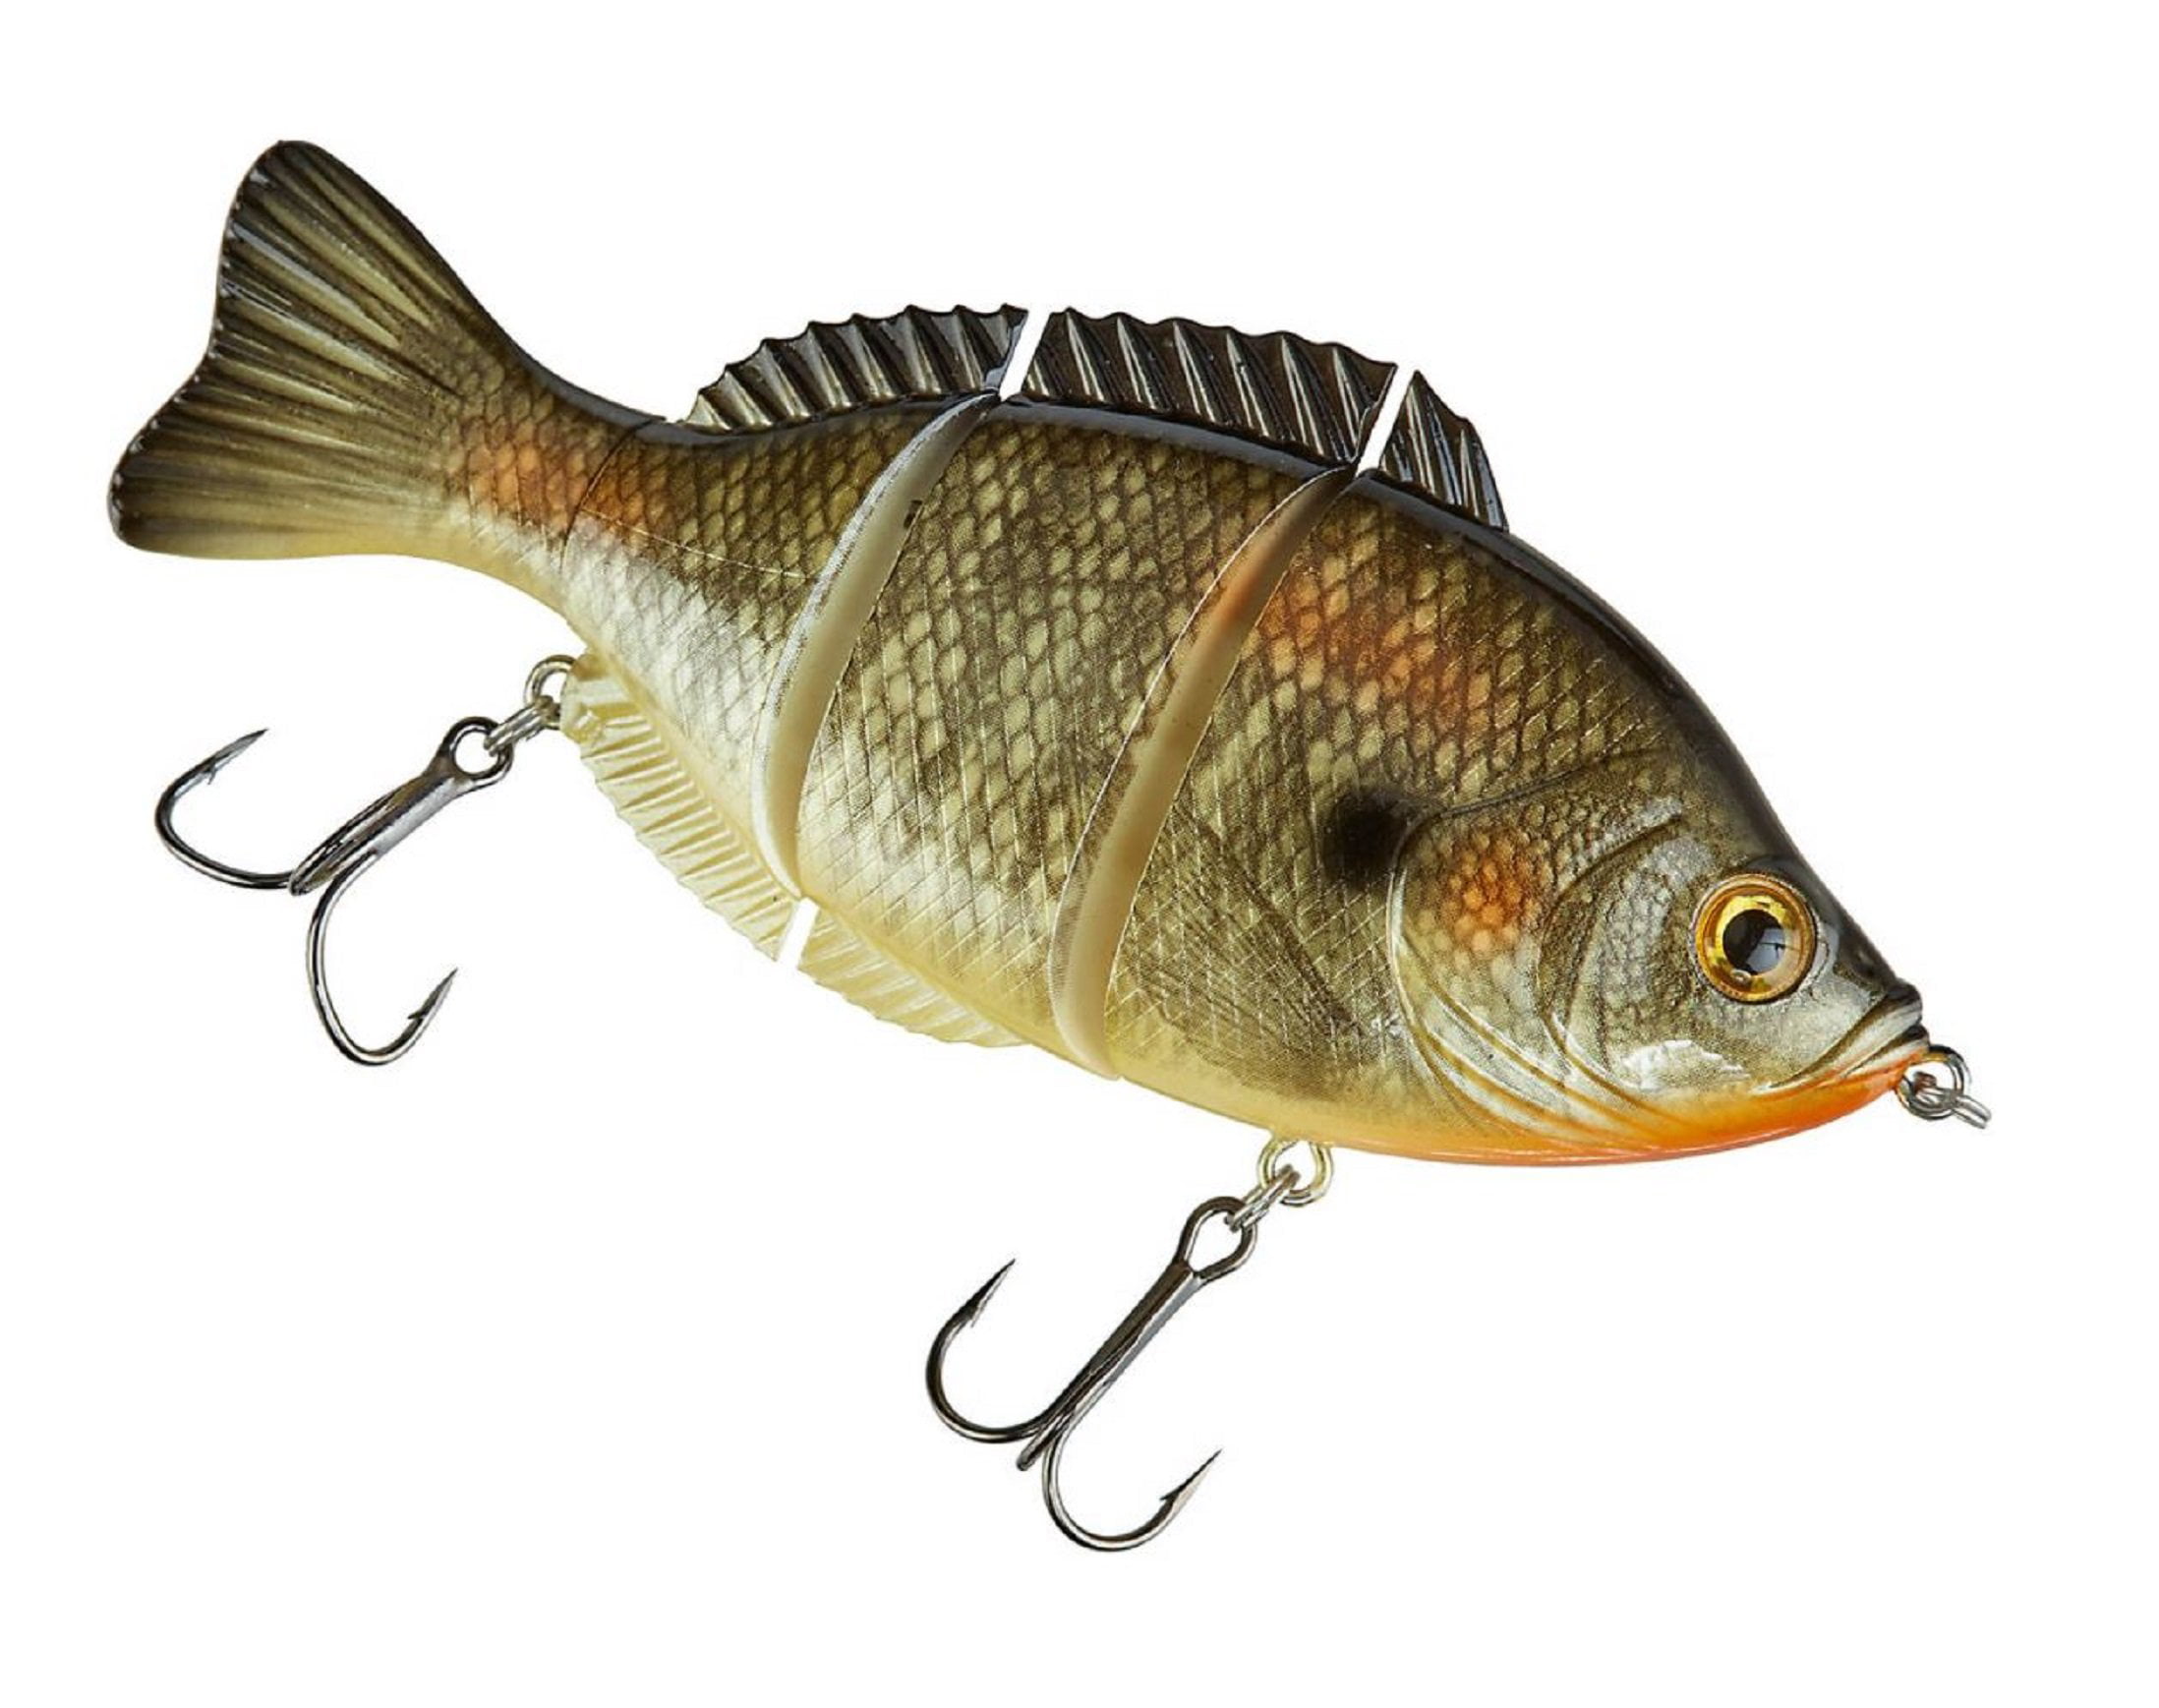 Live Pumpkinseed HARD TO FIND!!! H2O Xpress Jointed Crankbait Squarebill Lure 